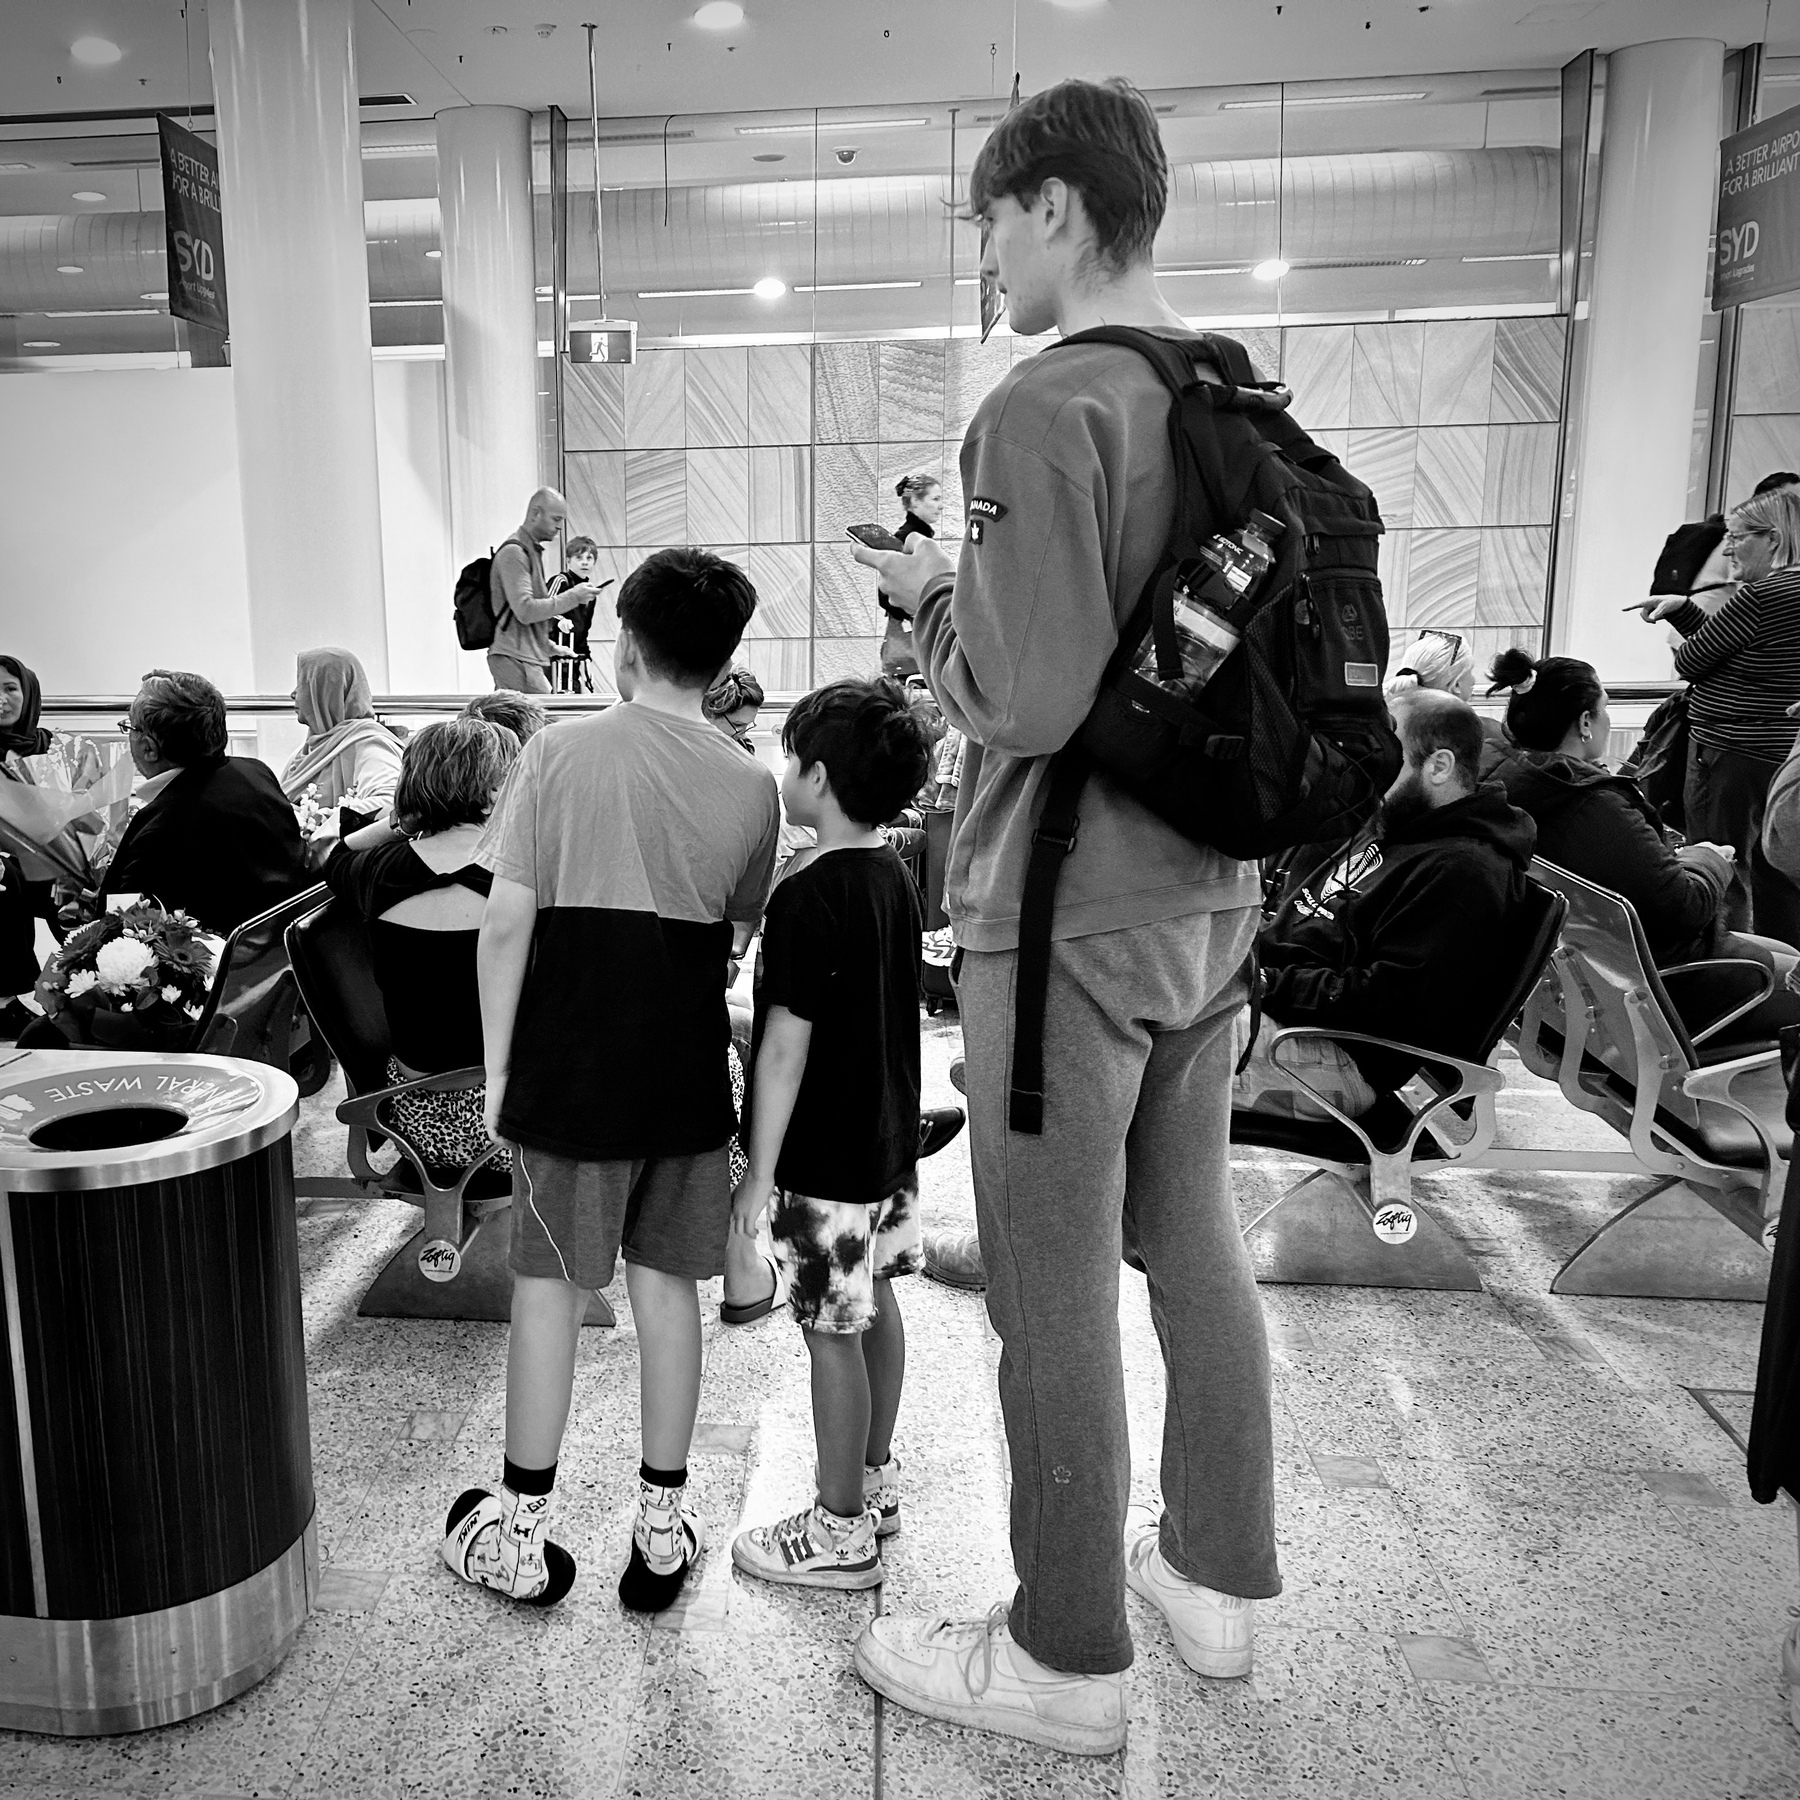 Three boys waiting at the airport. Two are shorter, one is very tall. 